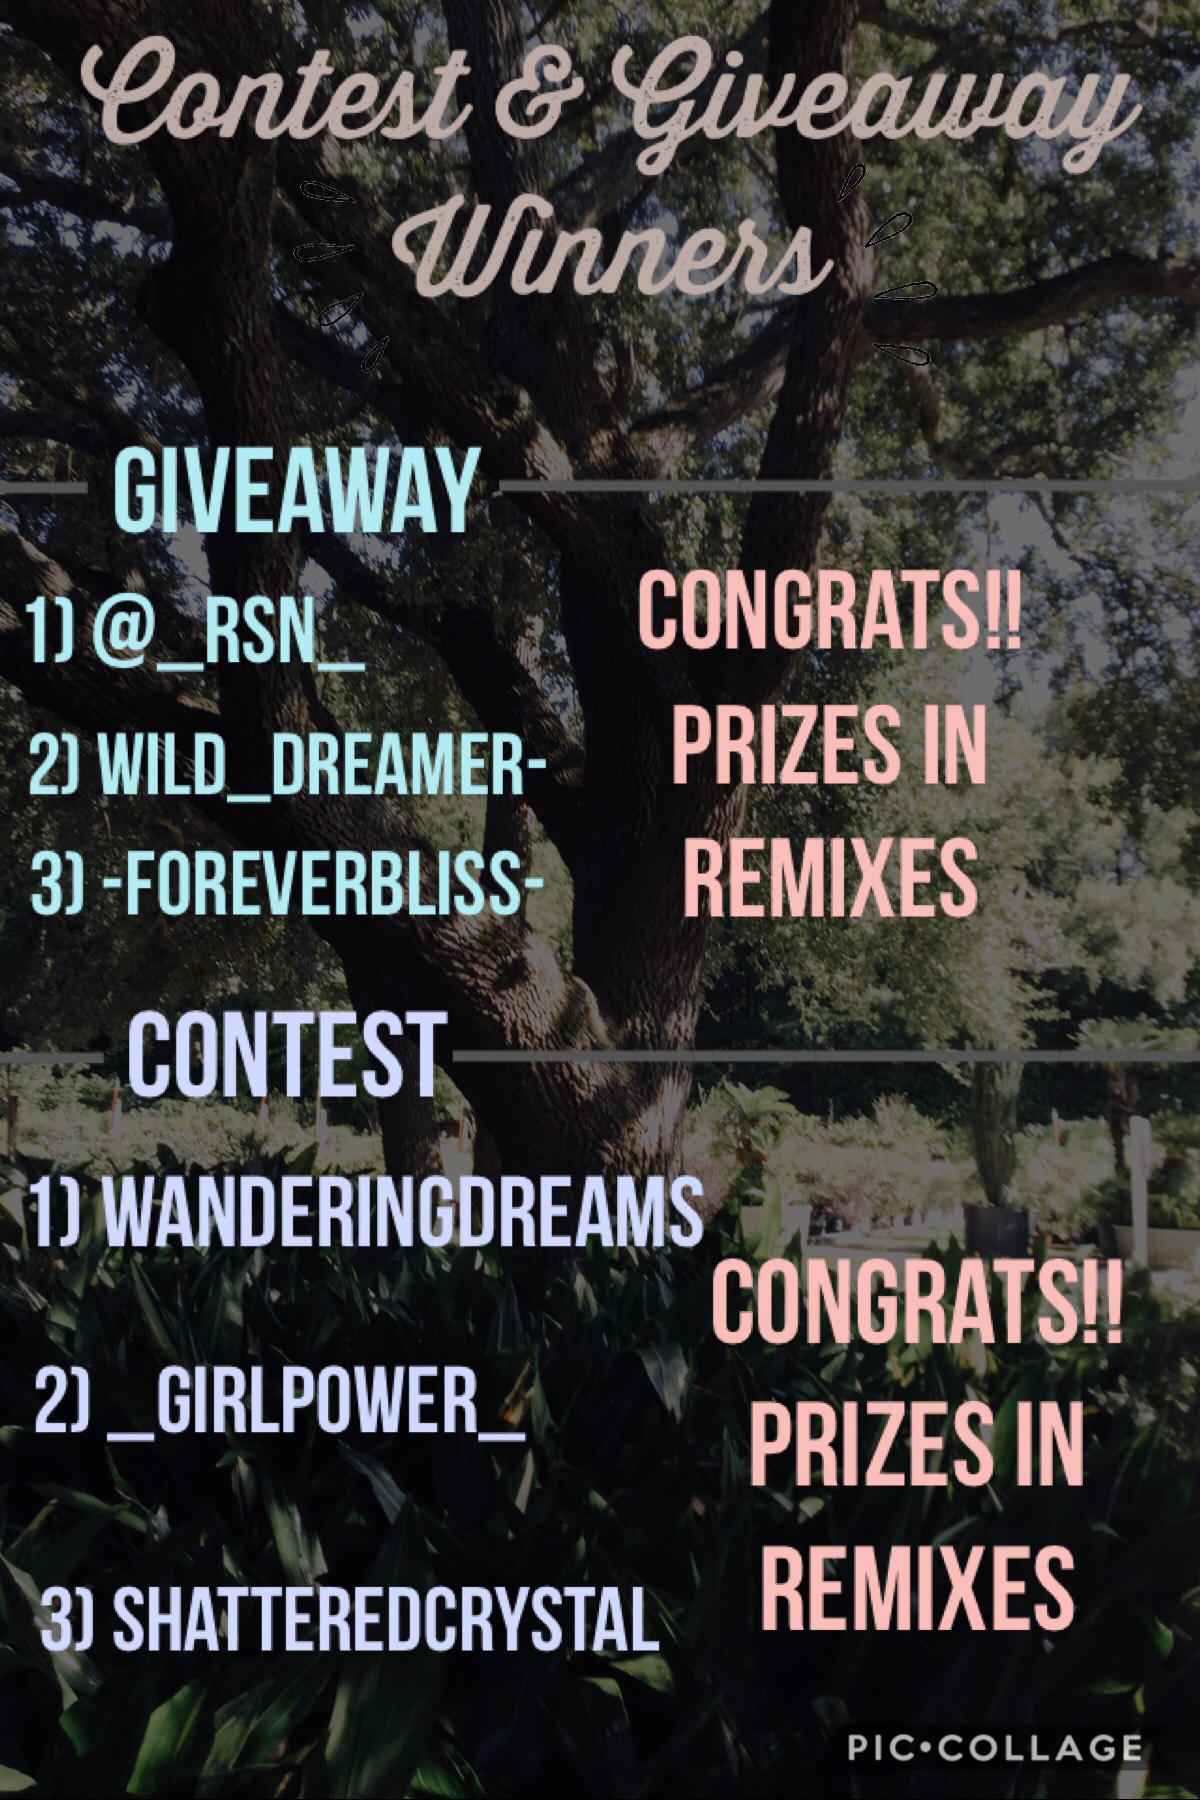 Congrats to all the winners!!🎉🎉 The Giveaway & the Contest winners have separate prizes to choose from in remixes! Honorable mentions are in remixes too!! Congrats again to everyone!!